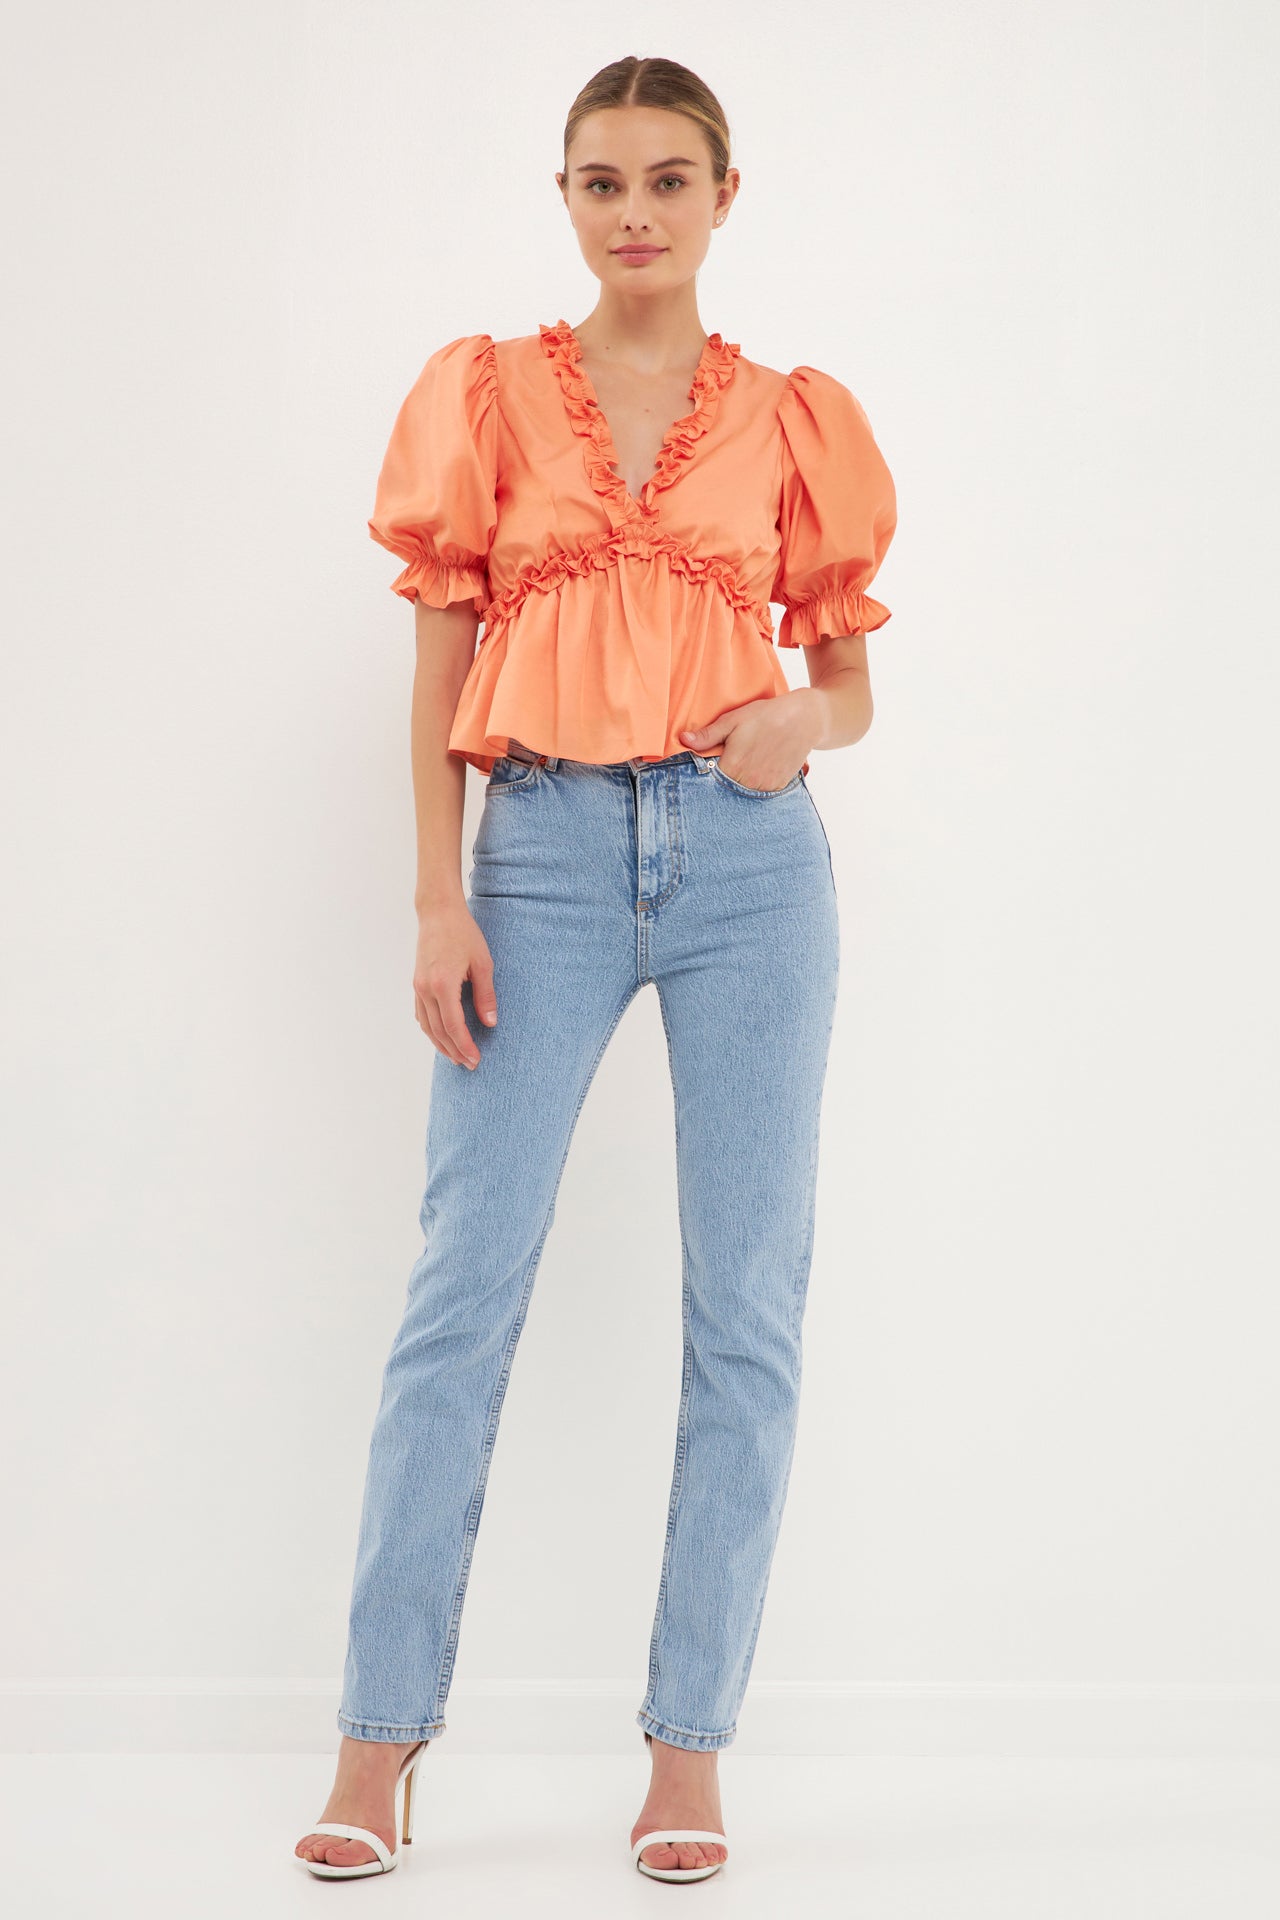 Ruffle Detail Top with Puff Sleeves – Endless Rose